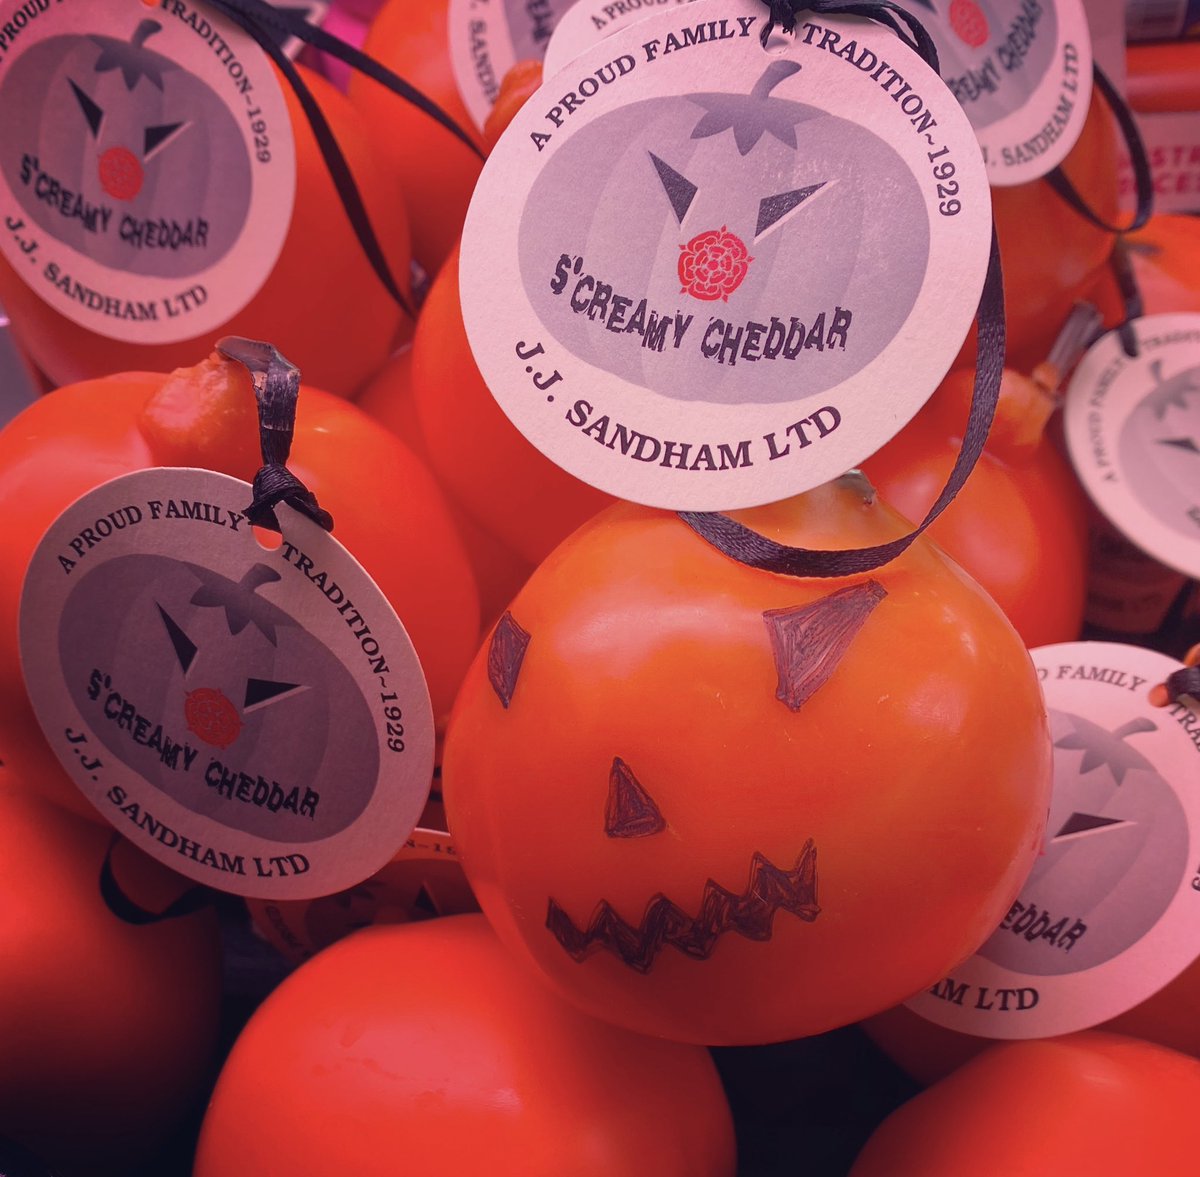 We have these fantastic S’creamy cheddar pumpkins from @SandhamCheese in the counter £4 or 3 for a tenner ! Won’t rot your teeth either 😉#TrickORTreat #haloweencheese #lovelancashire #supportlocal